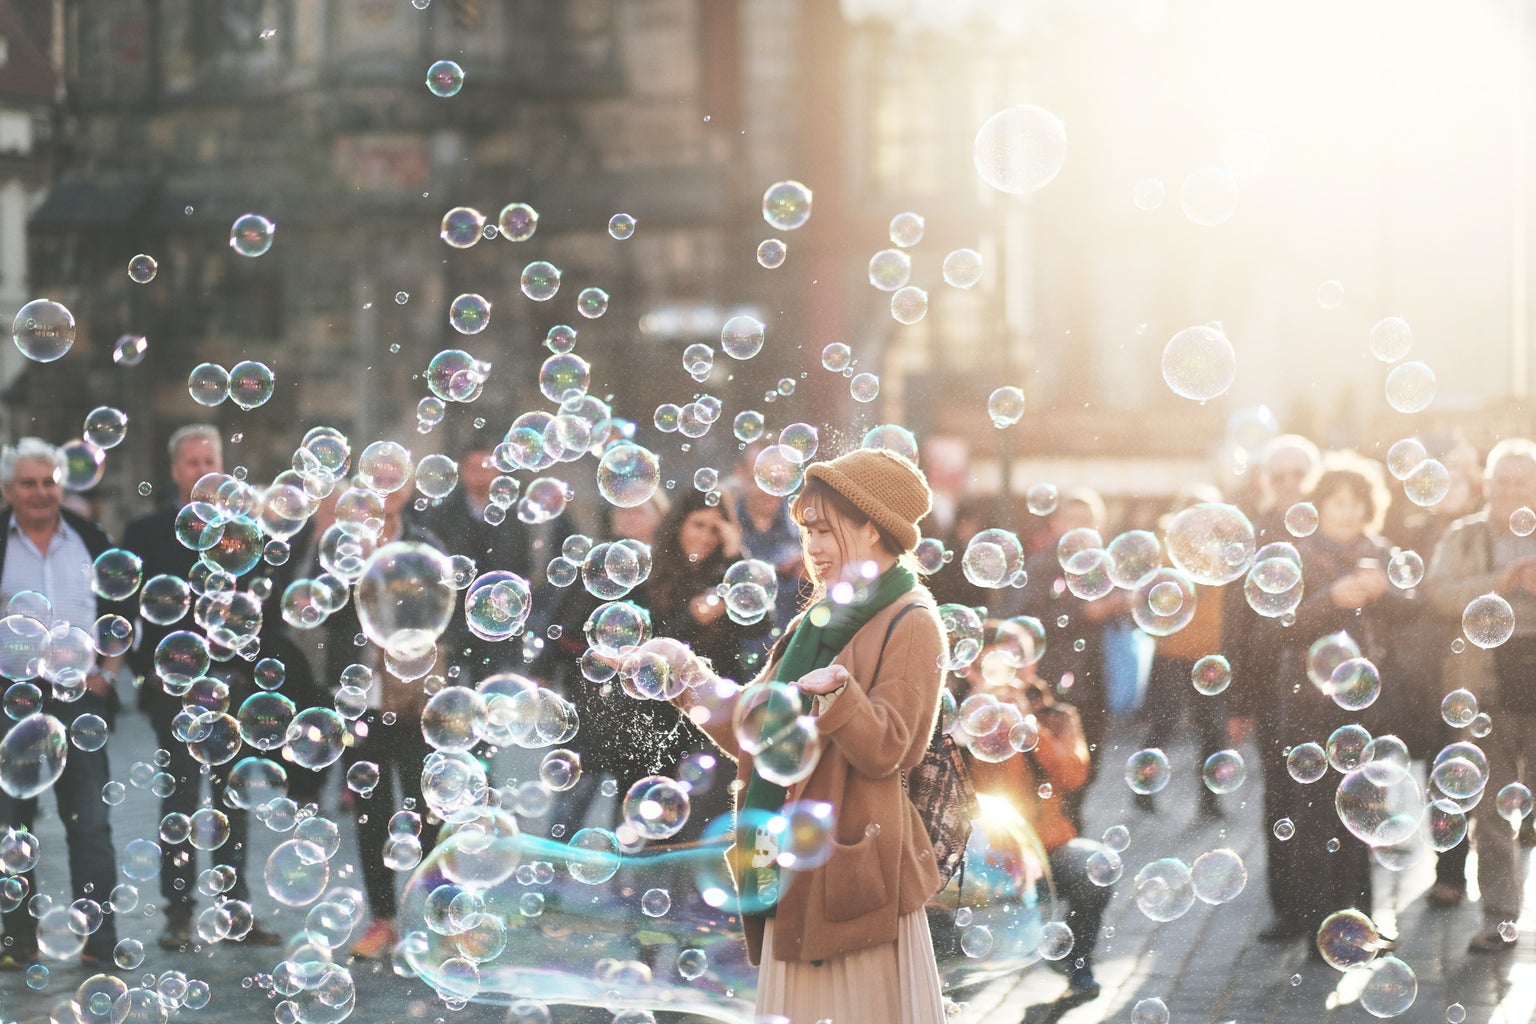 Woman outdoors in a beige coat and hat playing with bubbles, a crowd of folks in the background